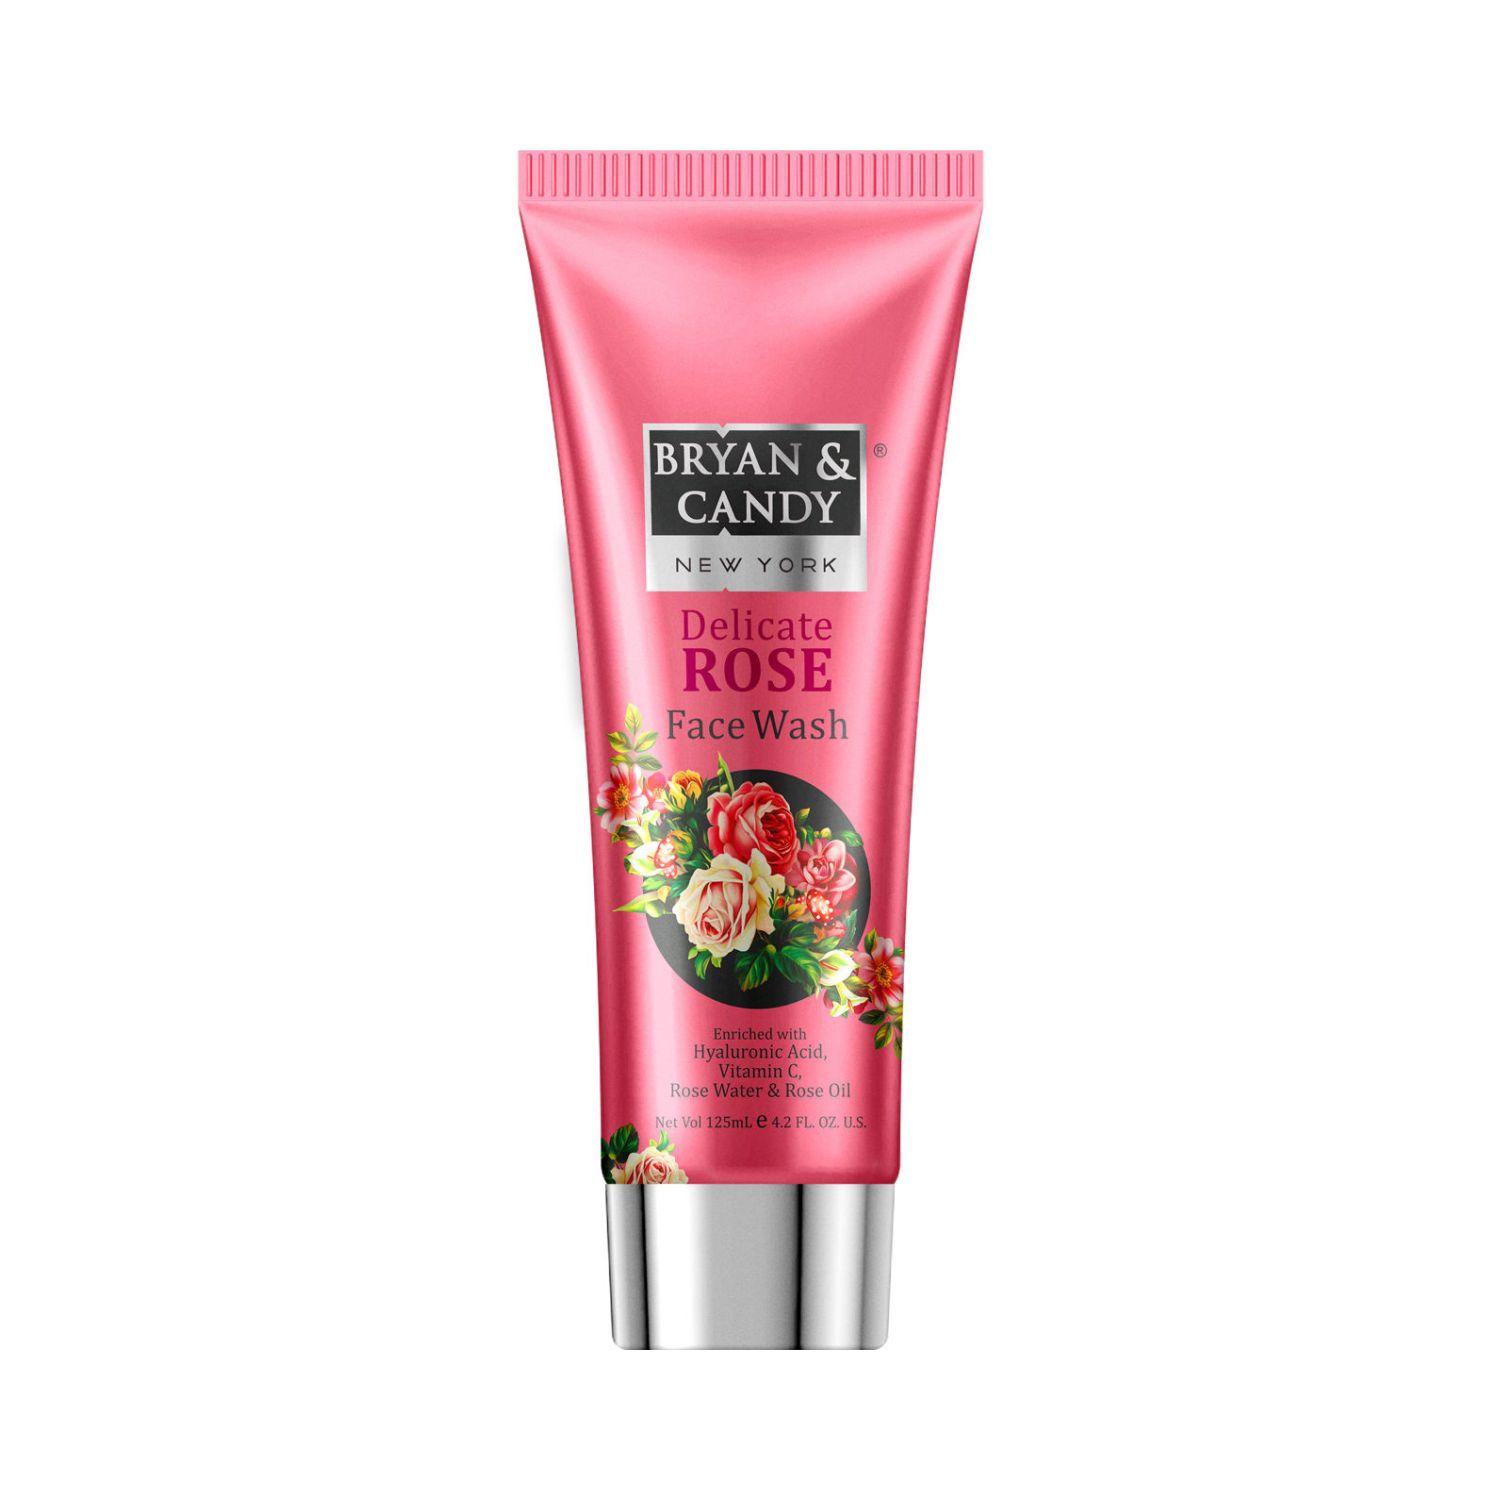 BRYAN & CANDY | BRYAN & CANDY Delicate Rose Face Wash (125ml)